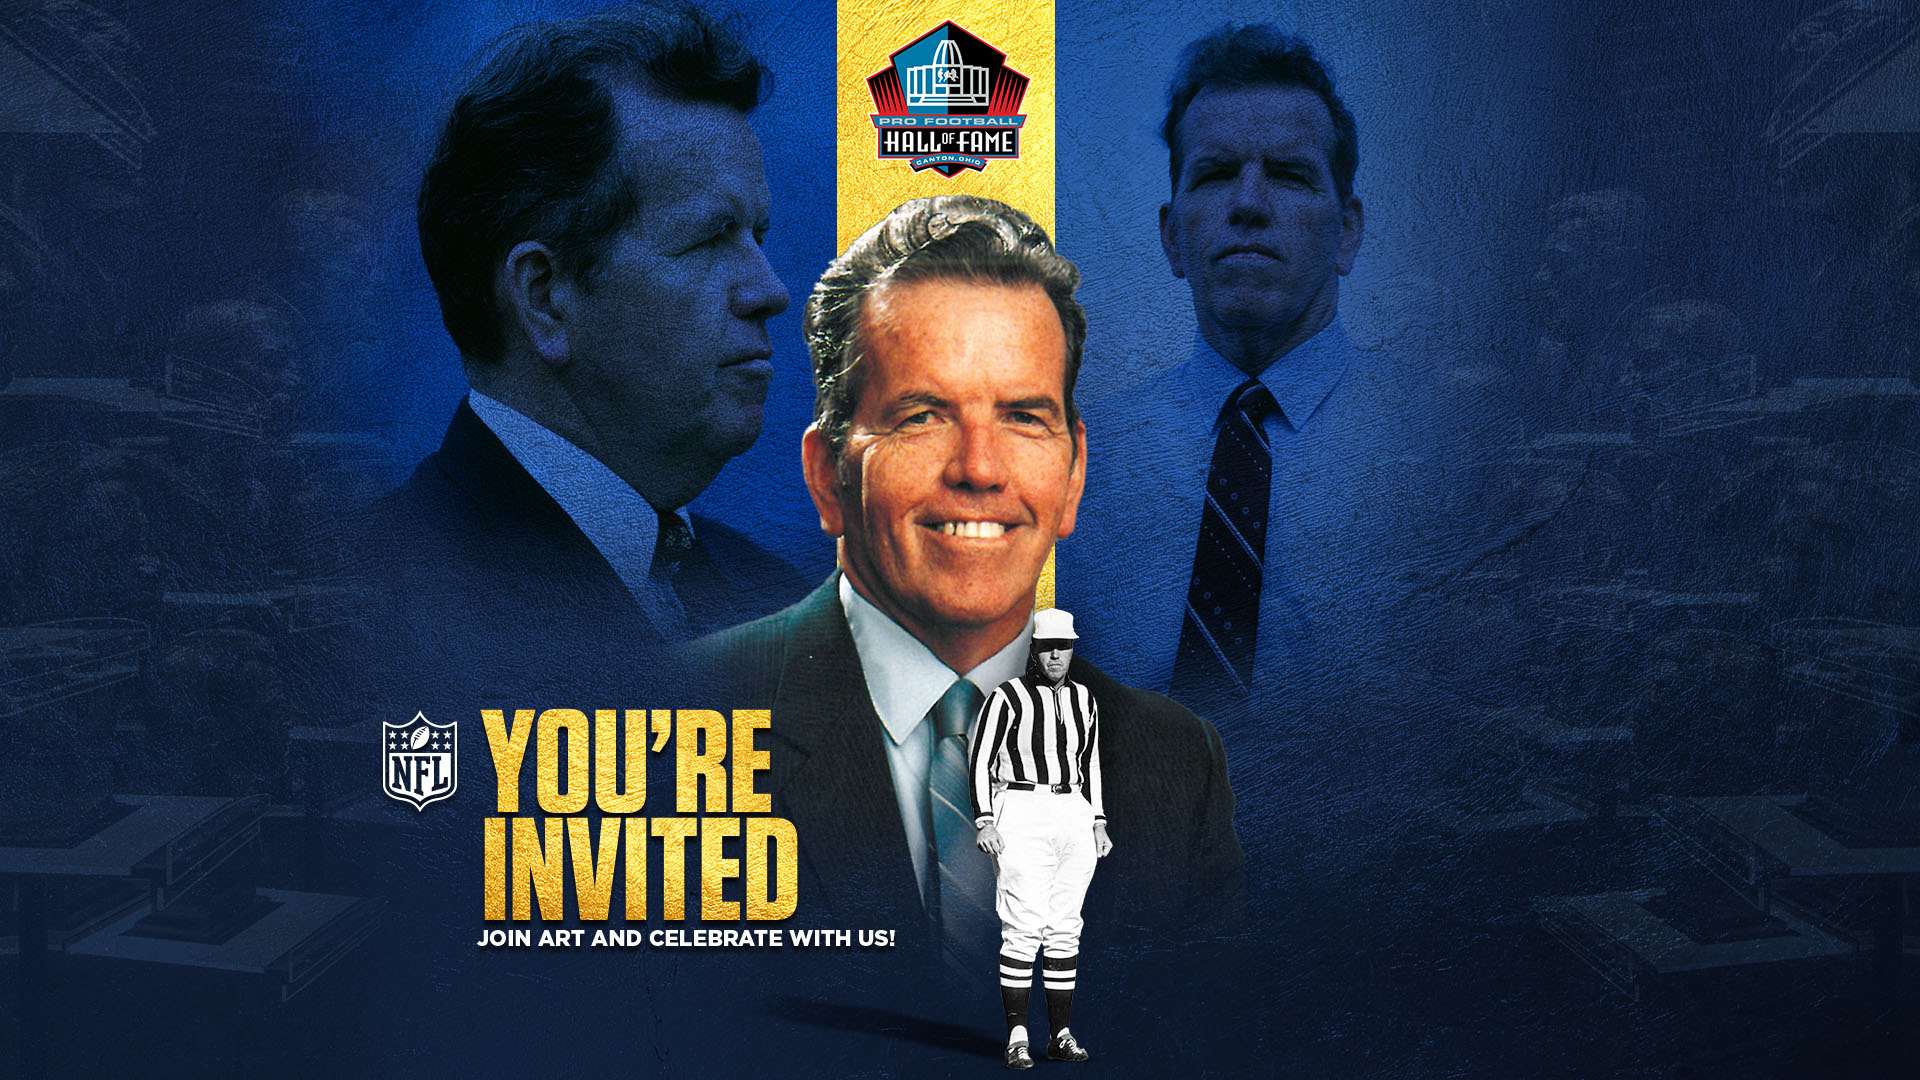 What to know: Pro Football Hall of Fame Enshrinement Week events, game  info, times, tickets 